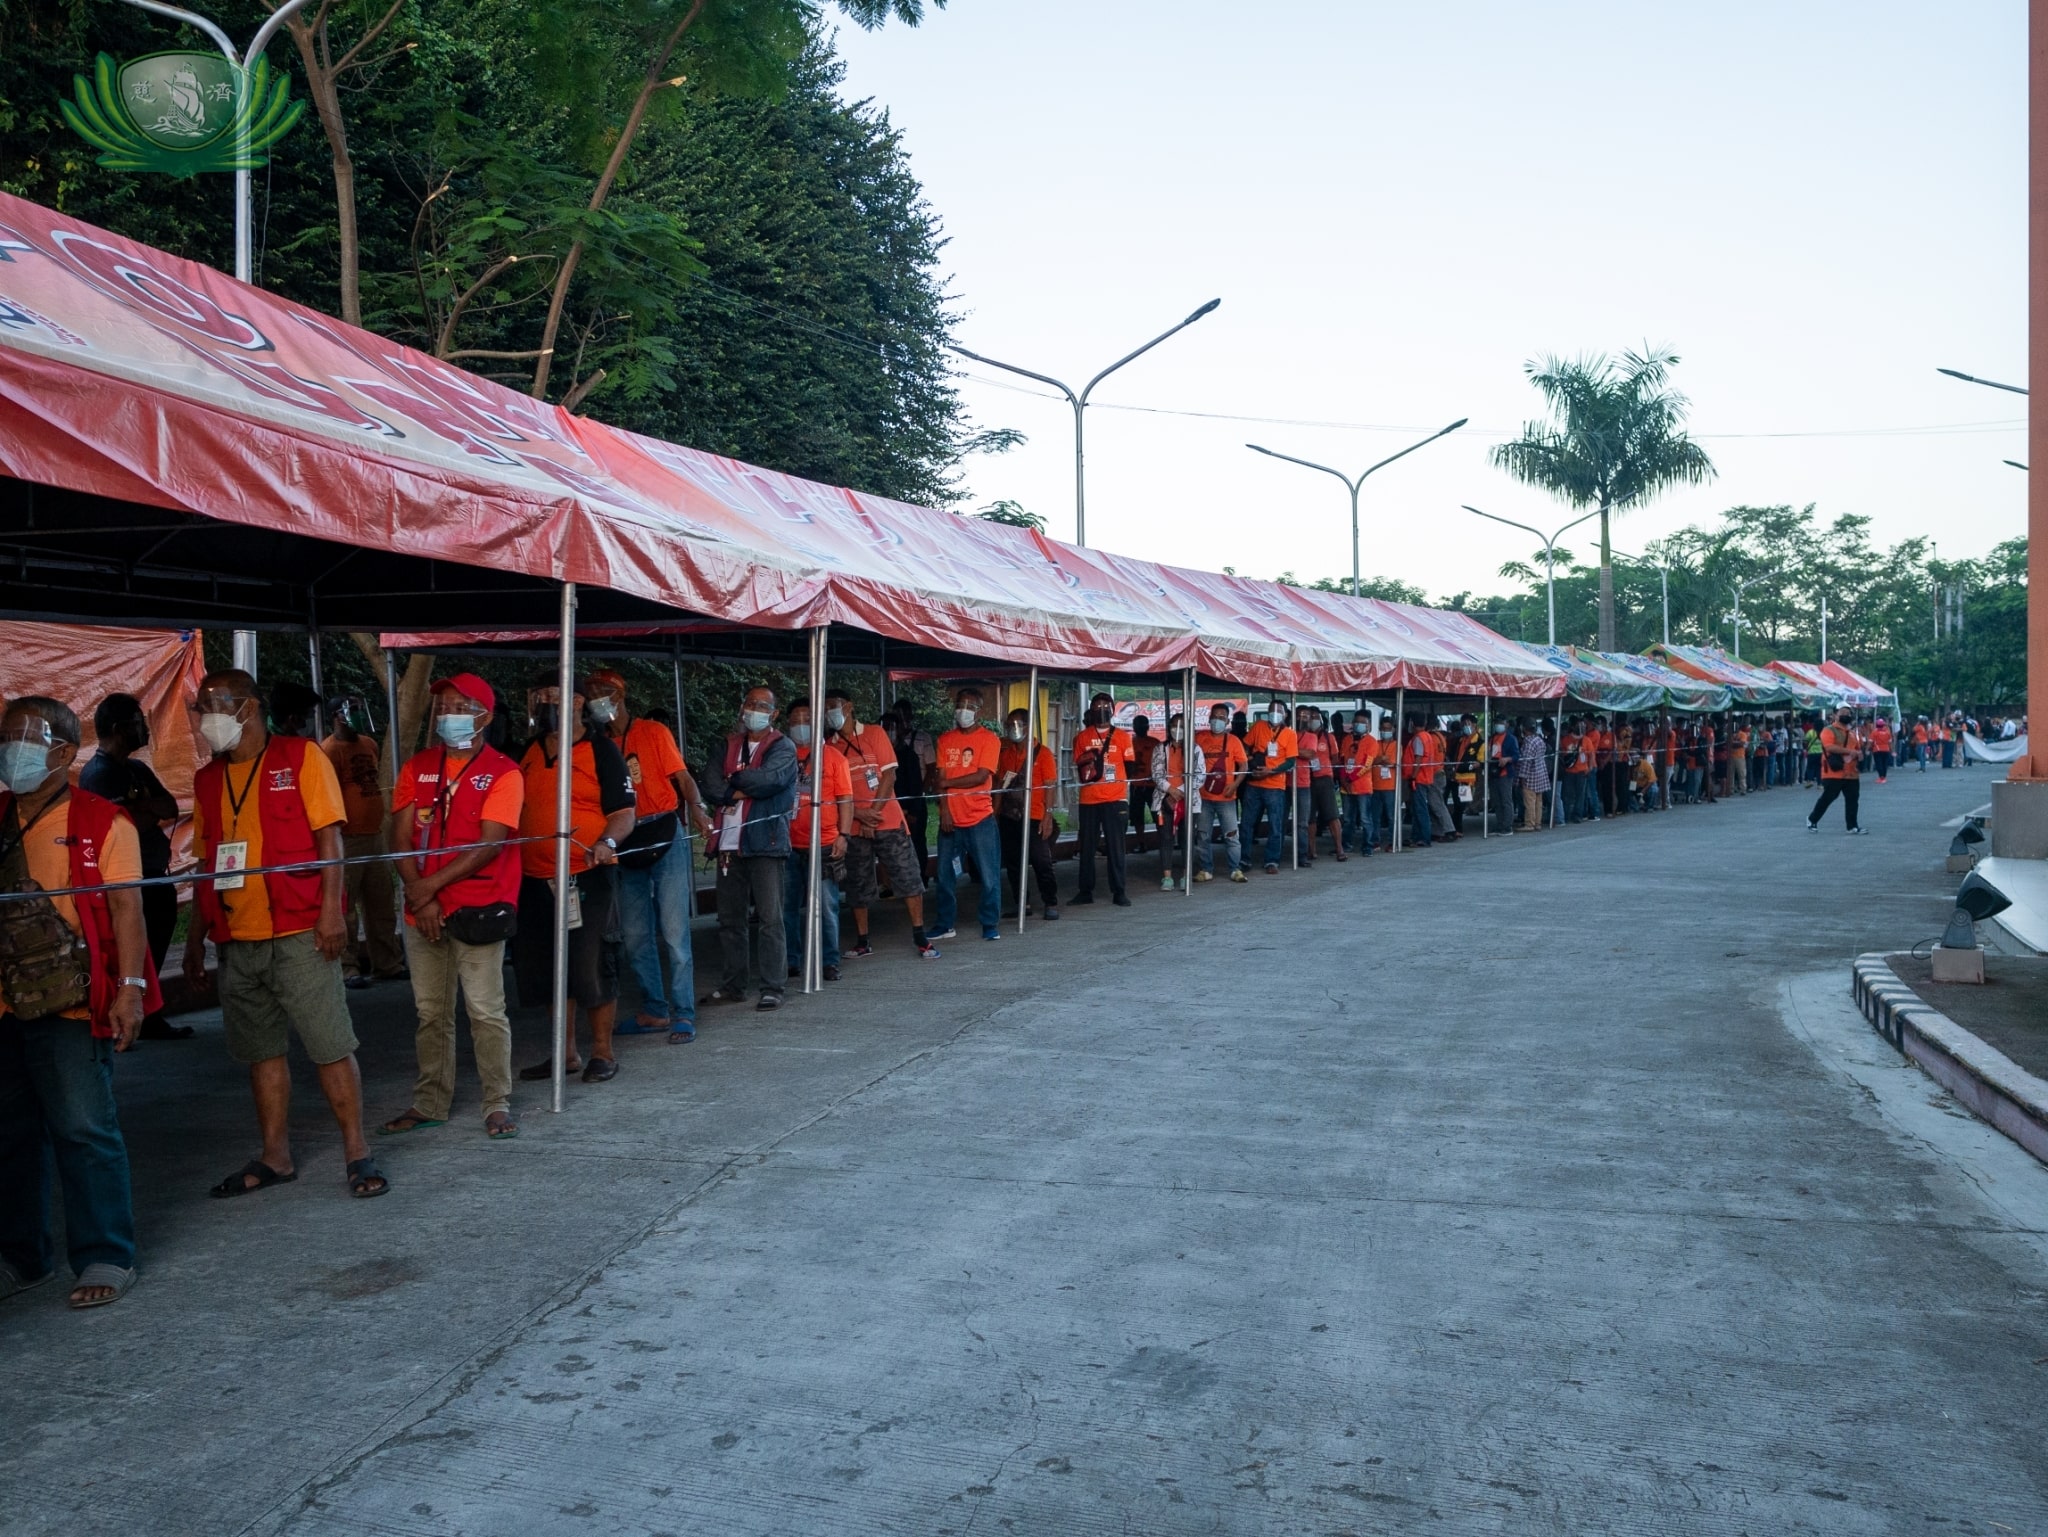 Caloocan North’s 2,721 tricycle drivers wait patiently in line along the driveway of the Caloocan Sports Complex. 【Photo by Daniel Lazar】 